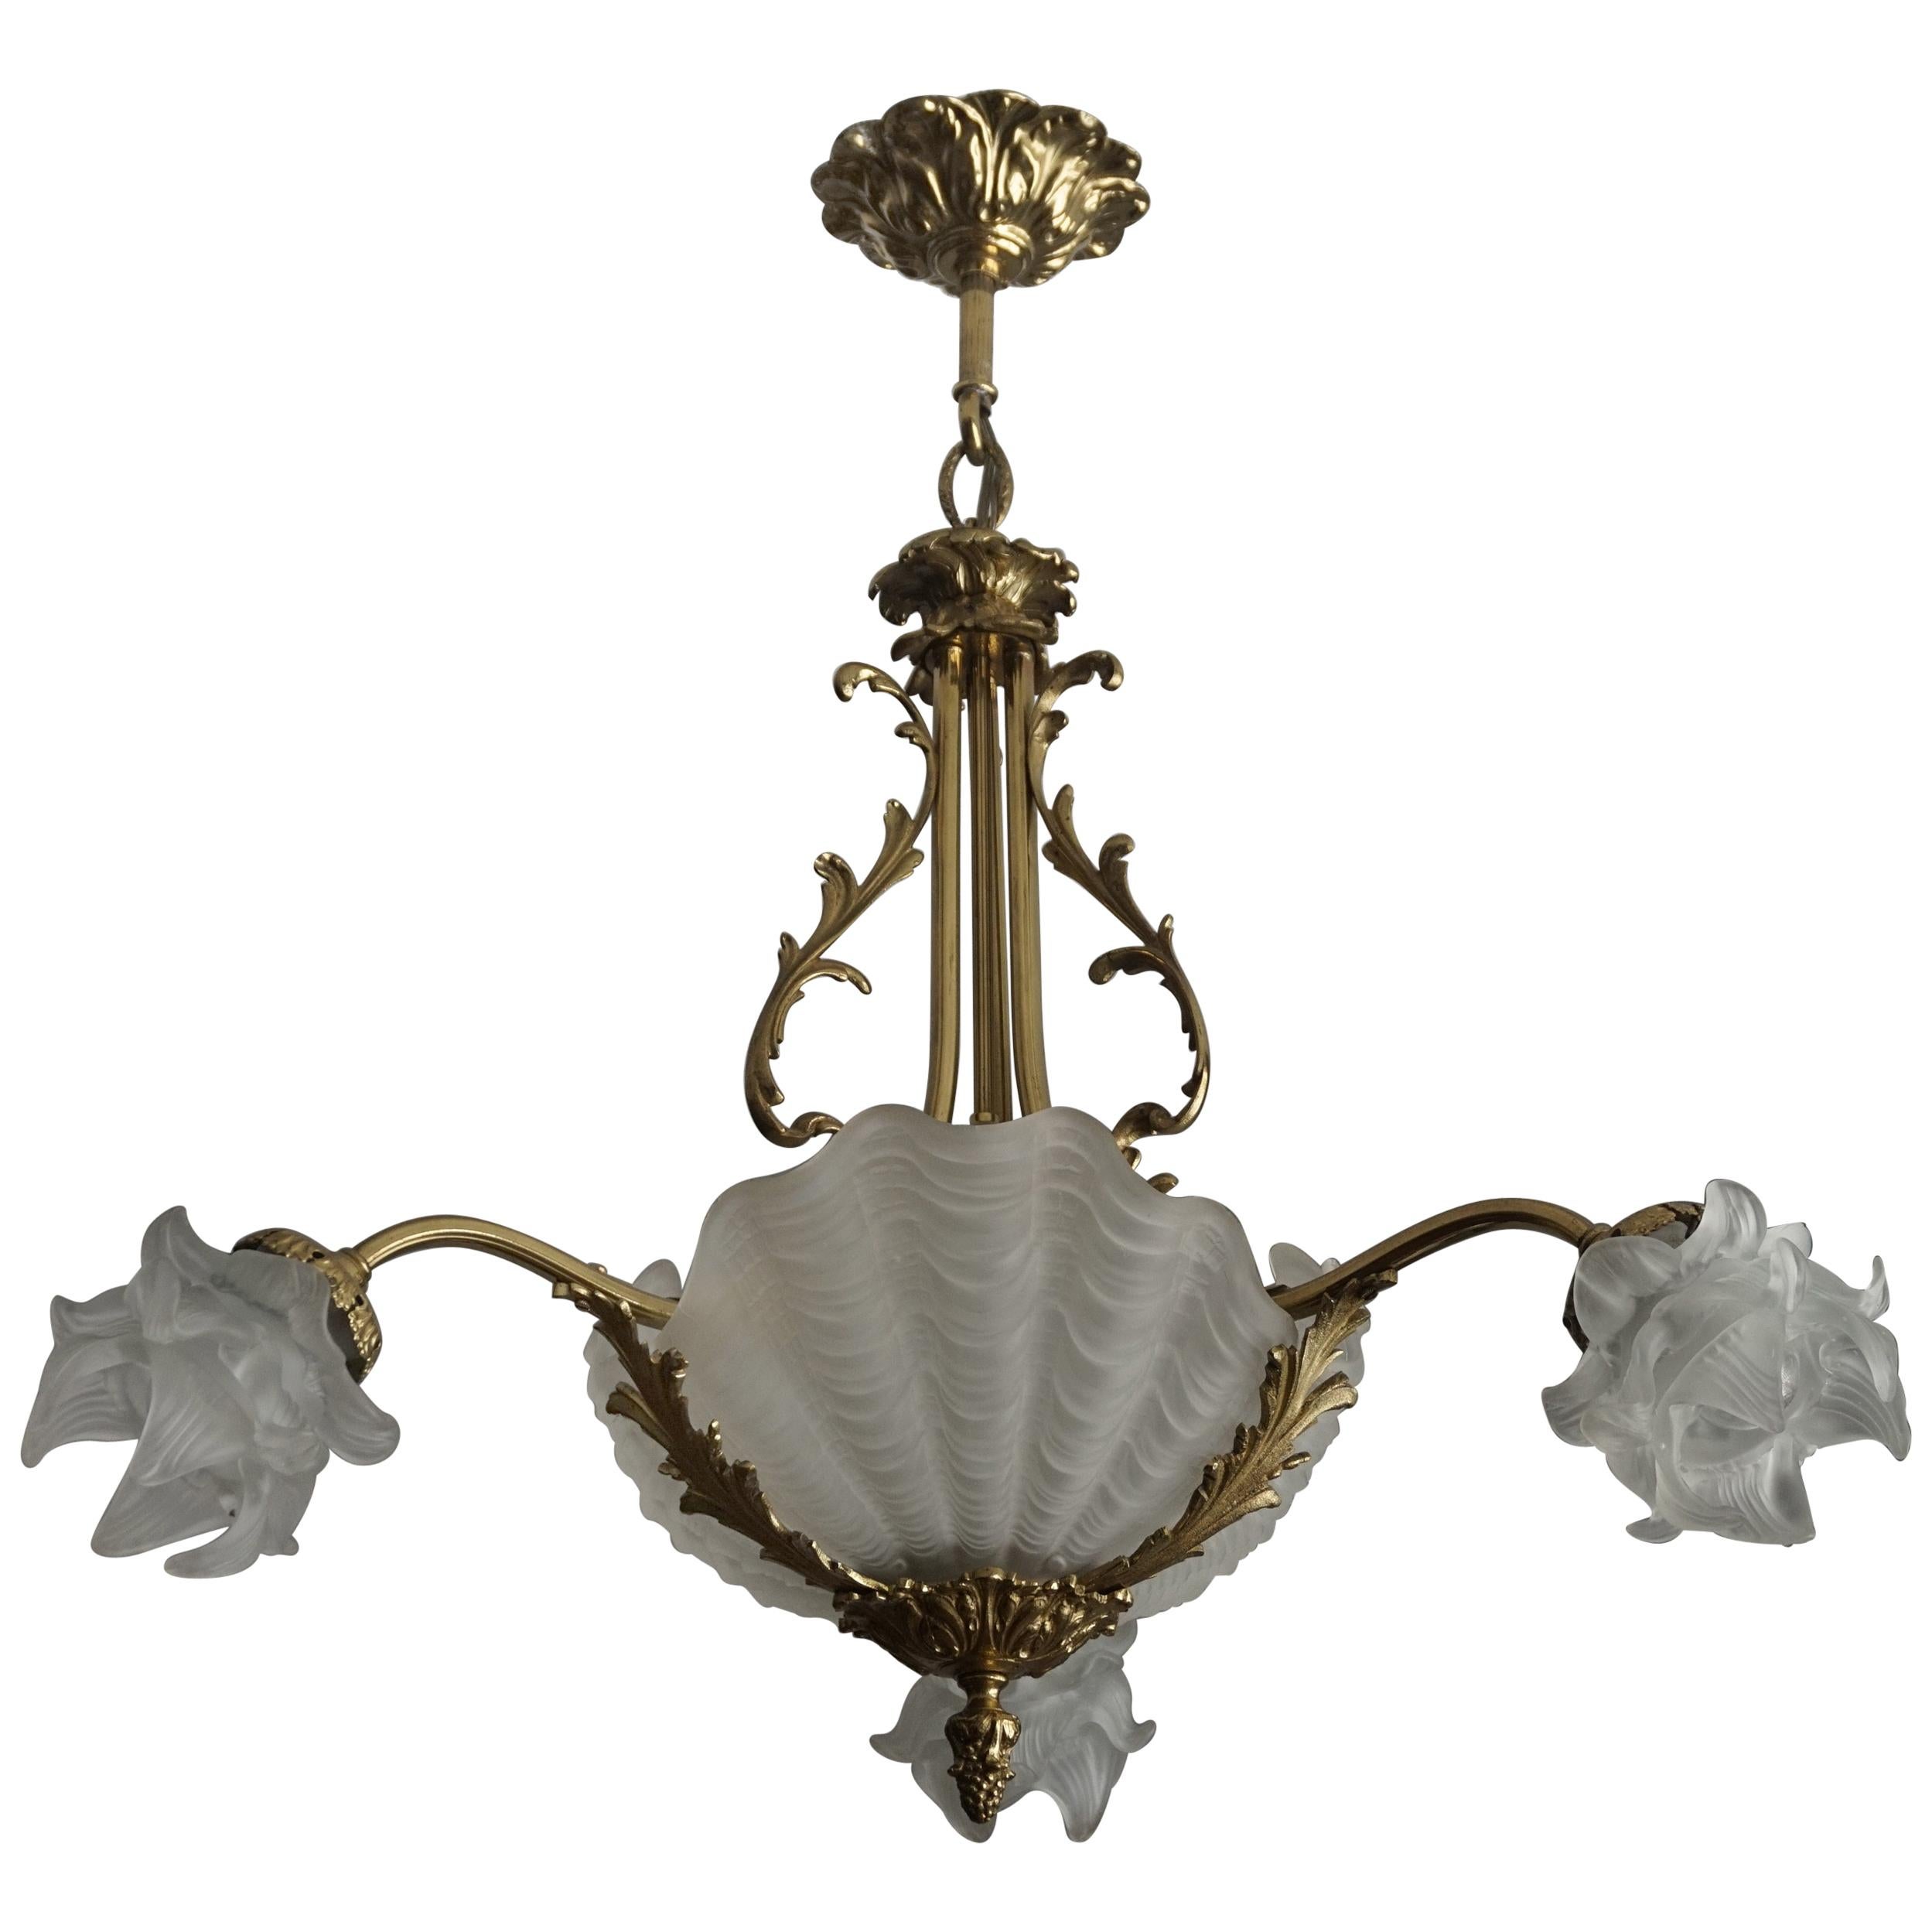 Antique Bronze Chandelier or Pendant Light with Glass Scallop Shell Shades, 1920